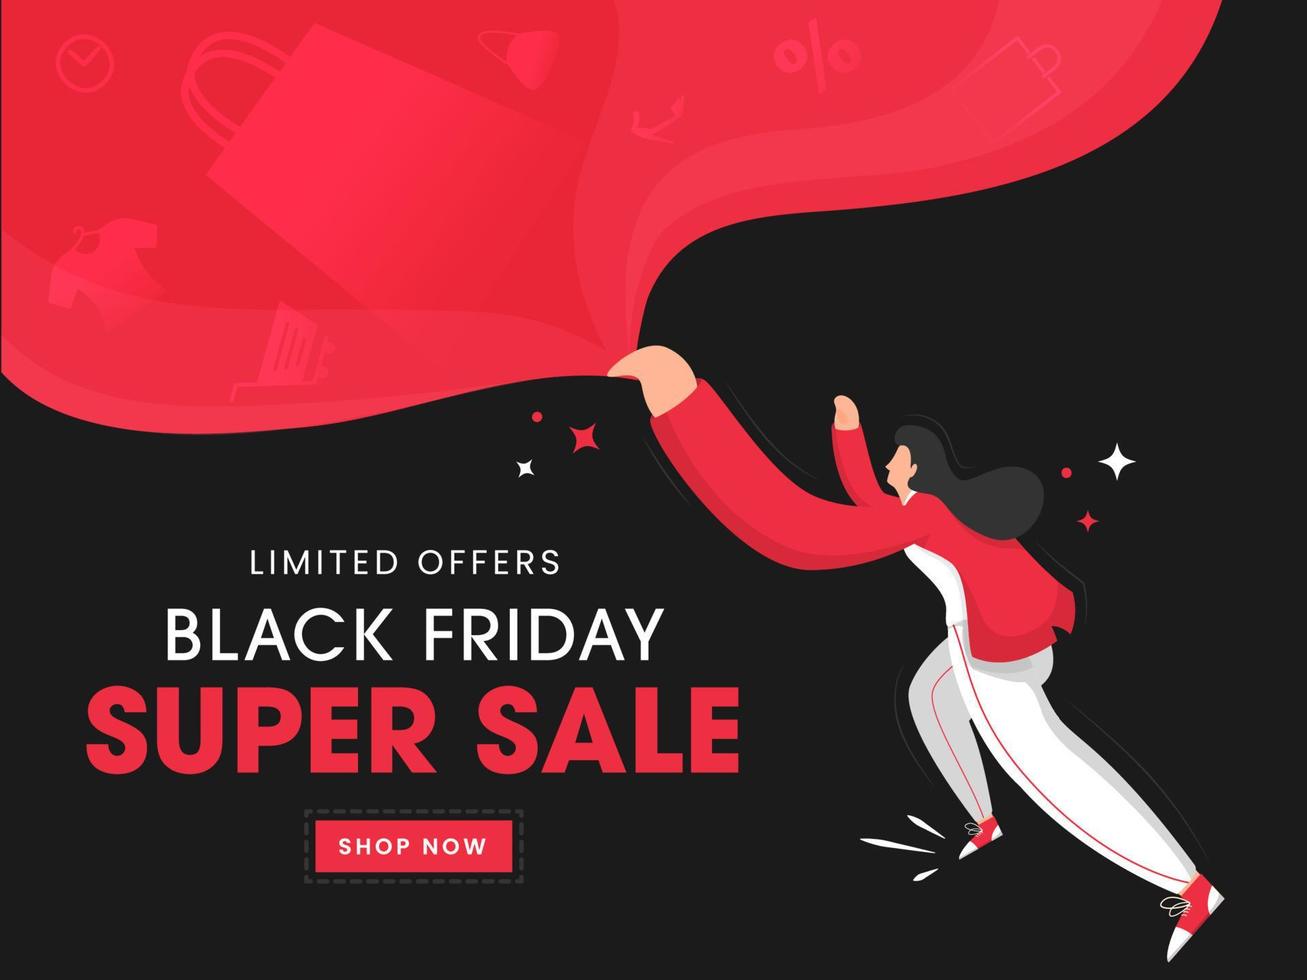 Black Friday Super Sale Poster Design With Cartoon Woman Character On Red And Dark Grey Background. vector